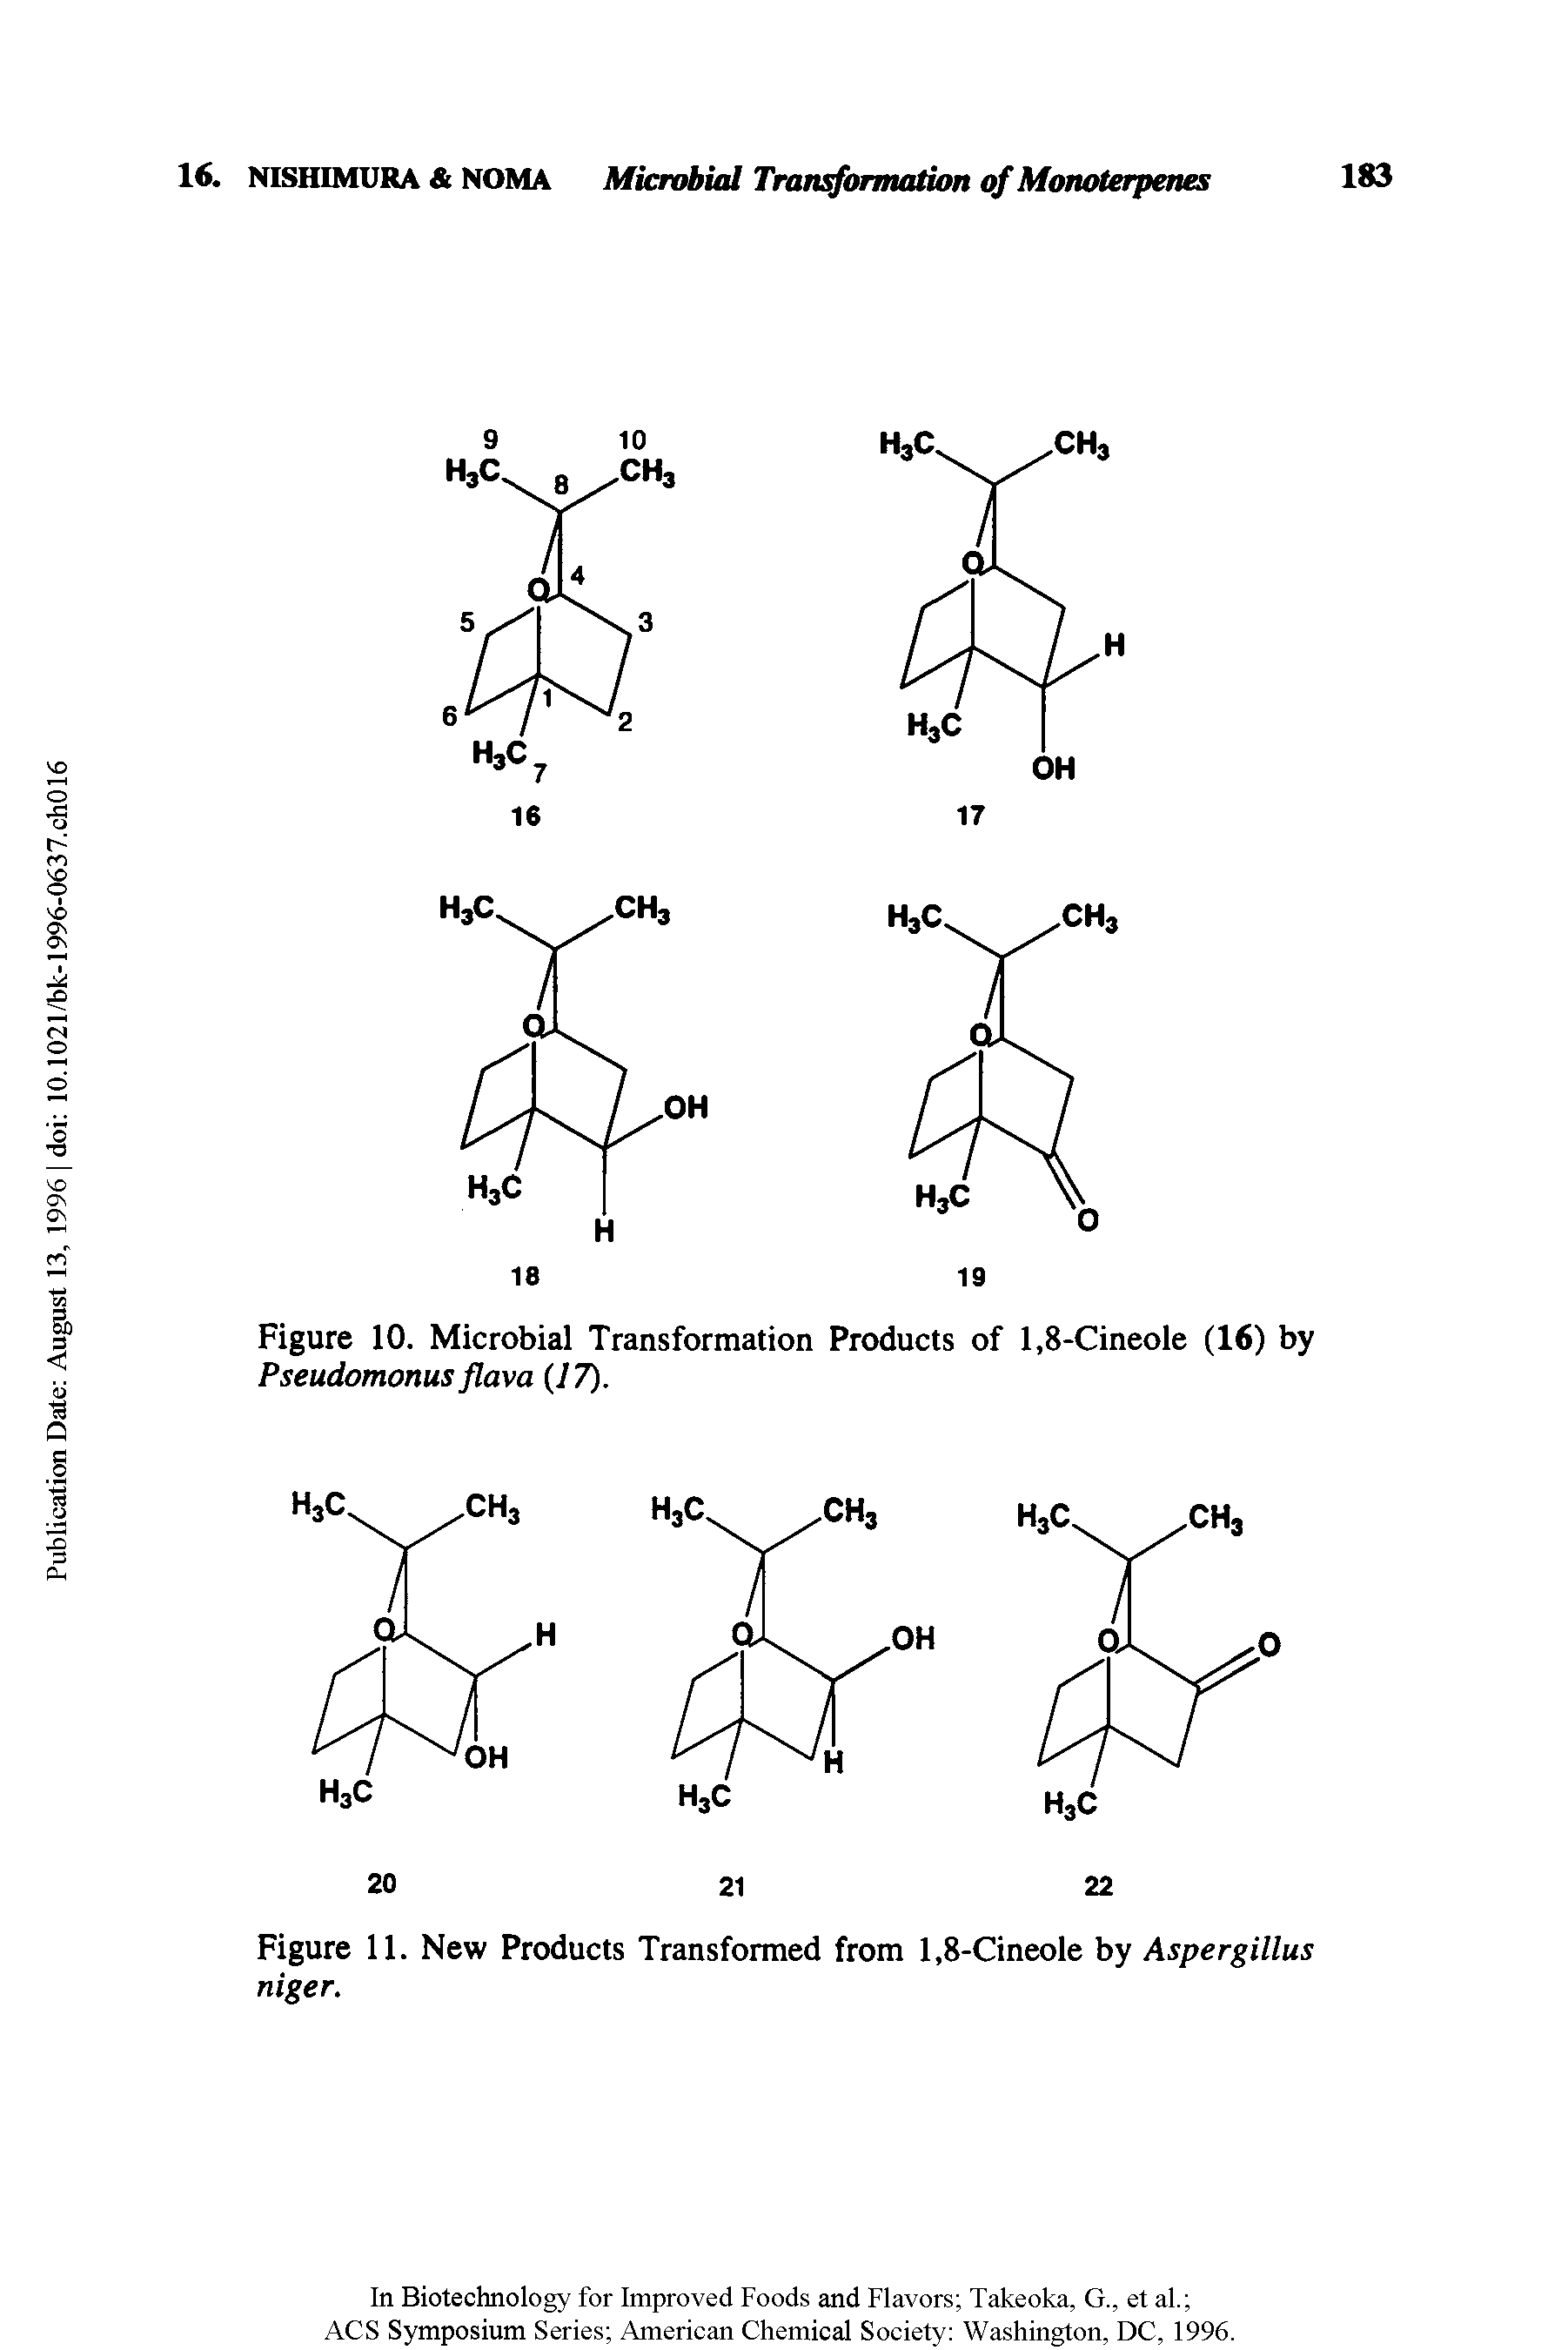 Figure 10. Microbial Transformation Products of 1,8-Cineole (16) by Pseudomonus flava 17).